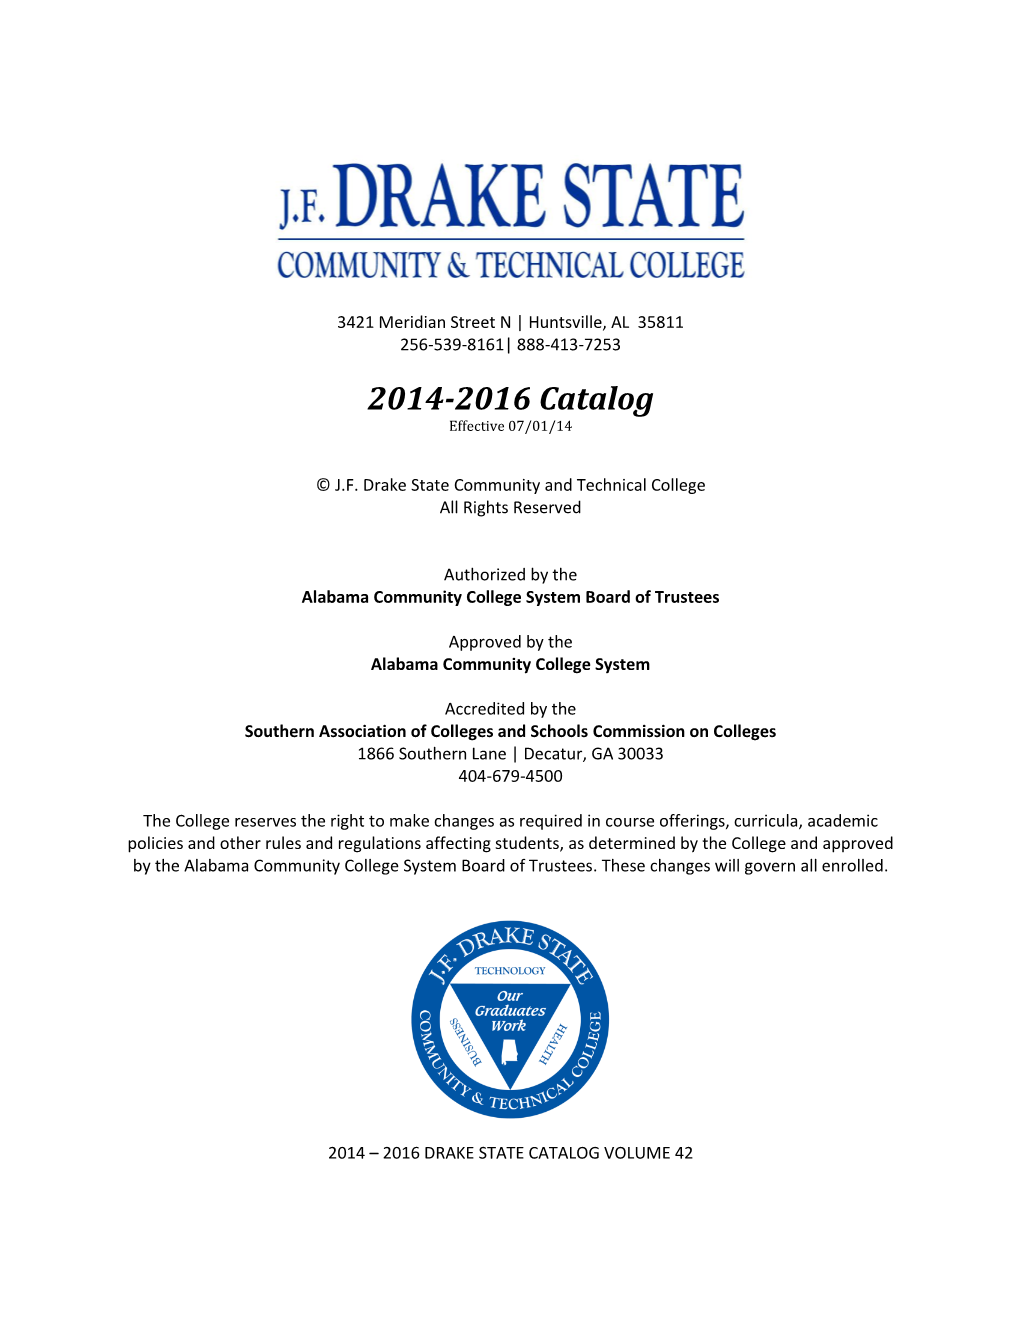 J.F. Drake State Community and Technical College Catalog